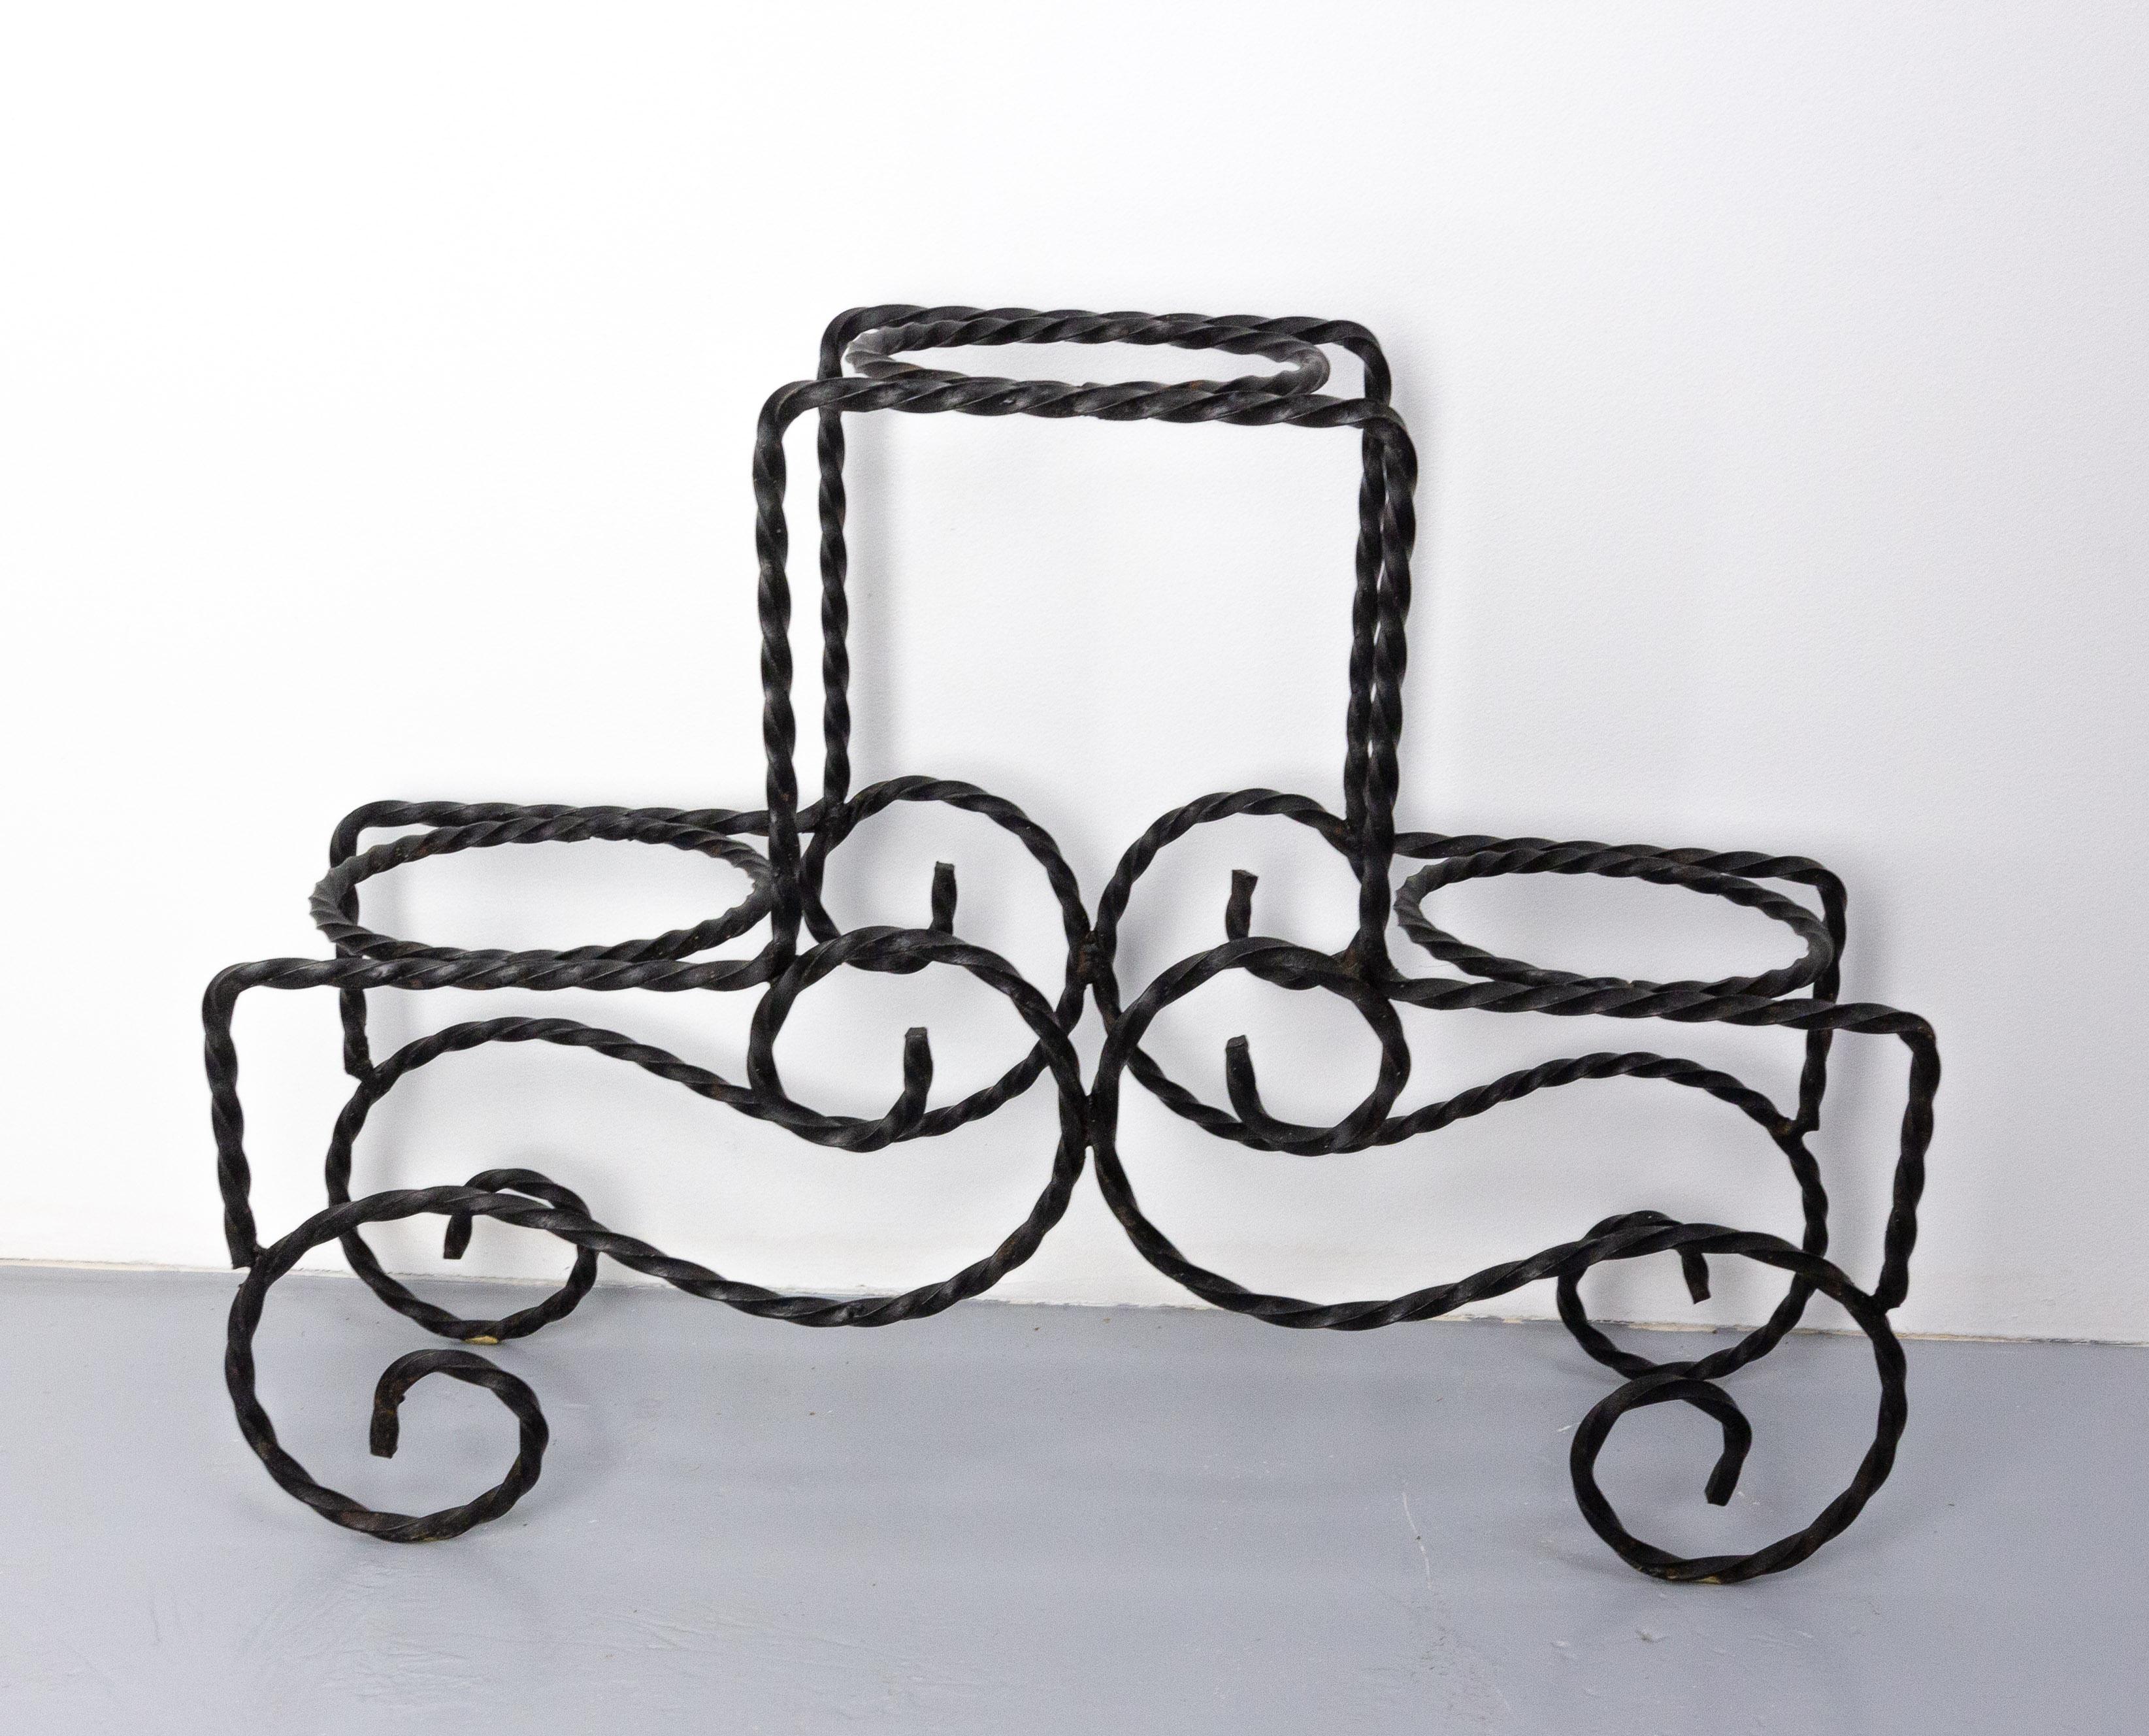 This wrought iron plant holder is from the French mid-century period.
It is typical of our terraces here in France.
Very good condition.

Shipping:
P 19.5 L 64 H 45 cm 4 KG.